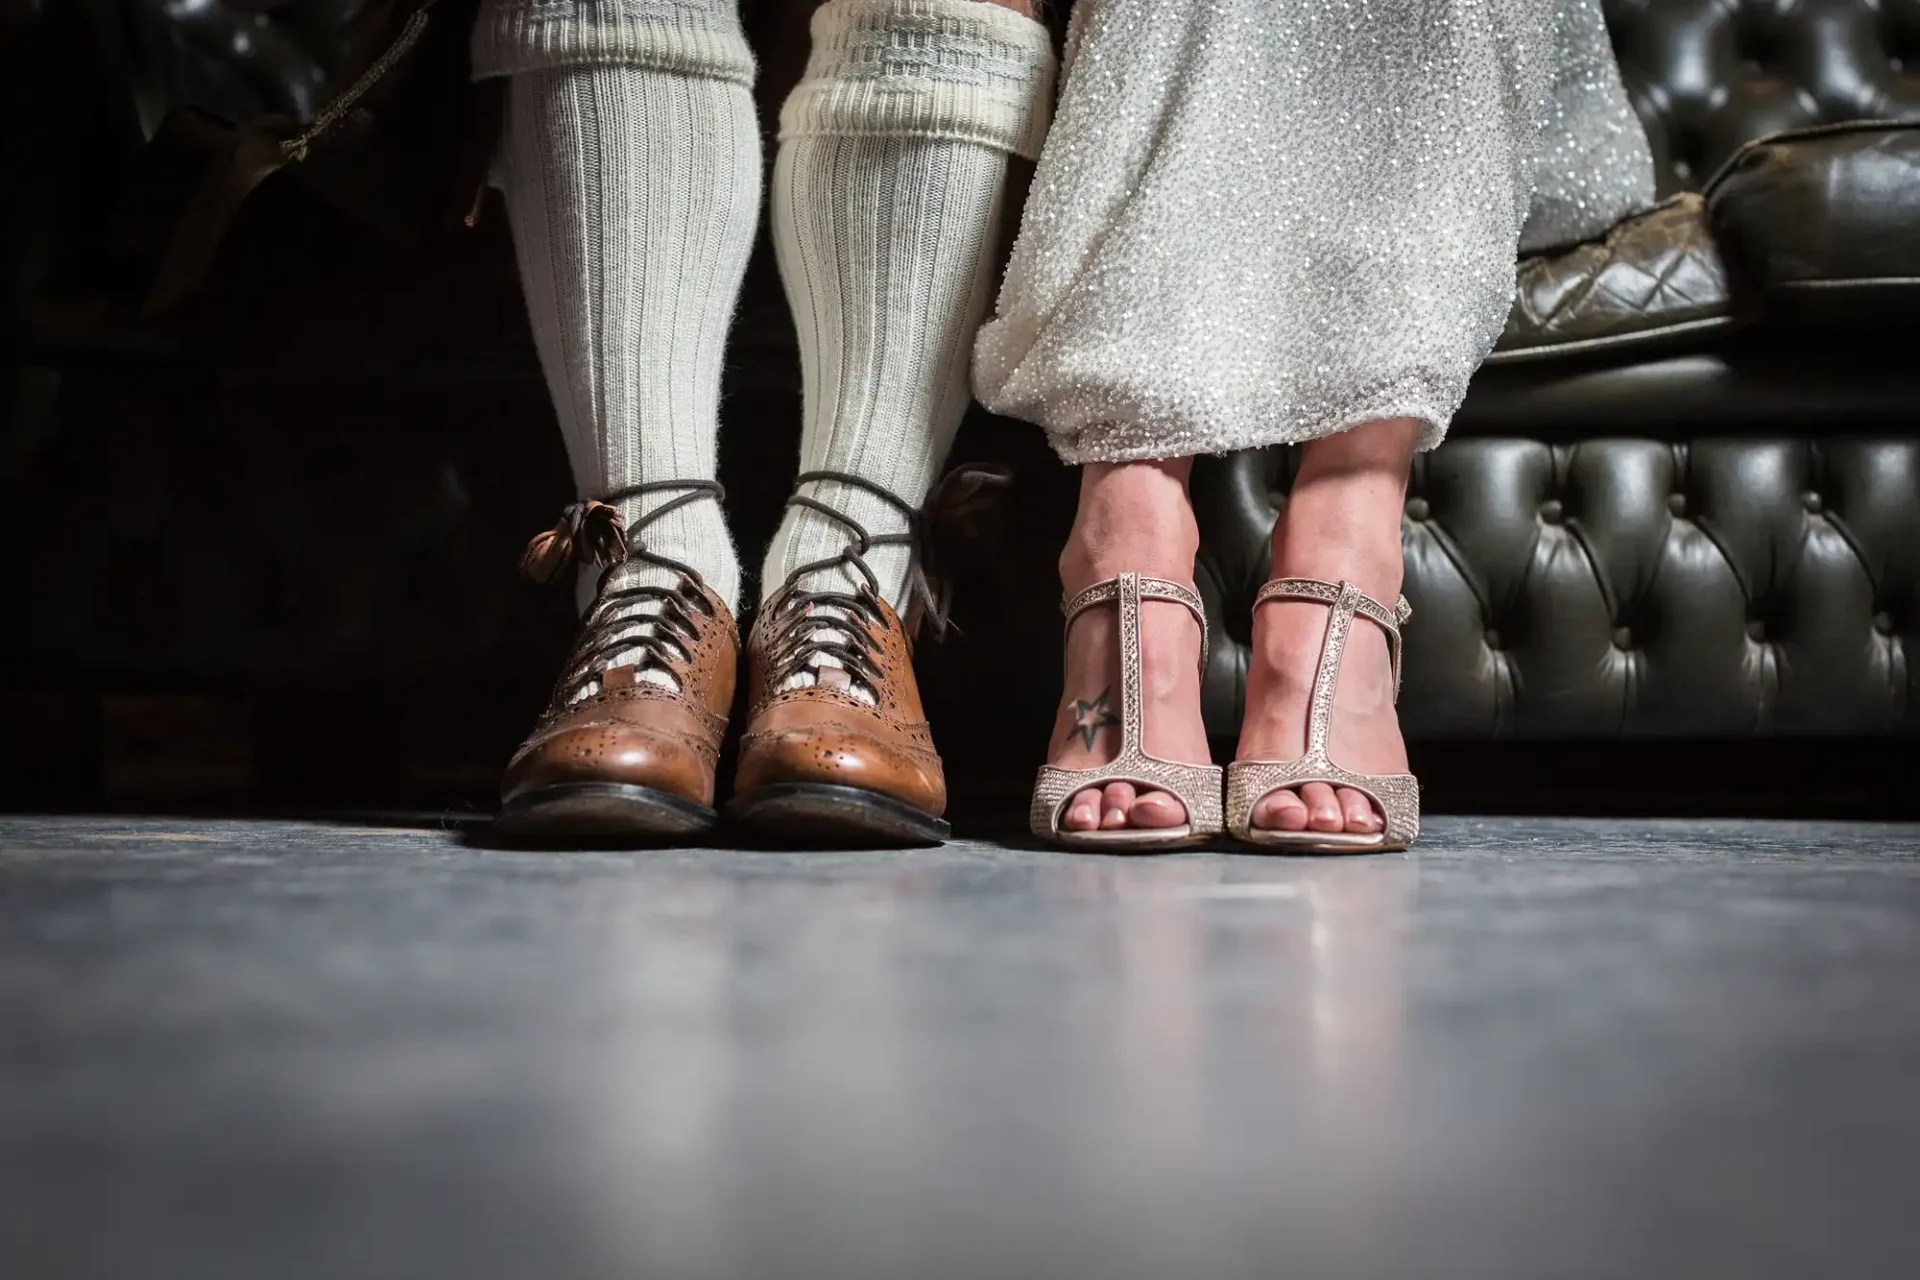 Two people standing side by side showcasing their footwear, one in brown lace-up shoes with socks, the other in silver strappy sandals, against a dark floor background.